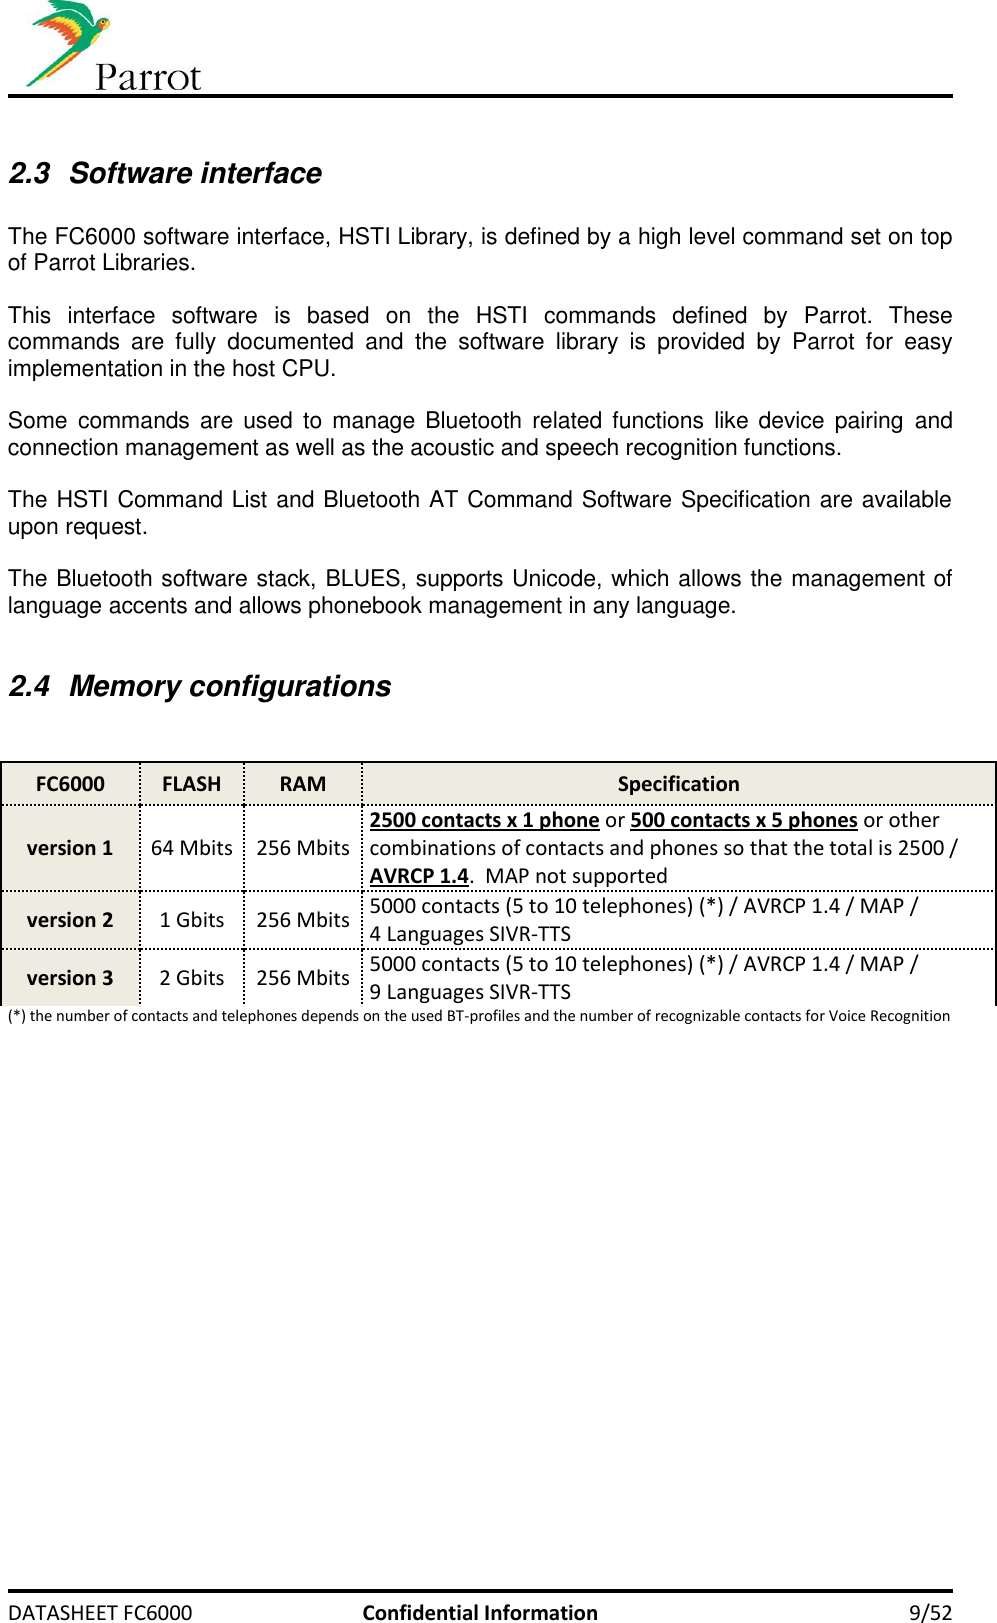     DATASHEET FC6000  Confidential Information  9/52  2.3  Software interface  The FC6000 software interface, HSTI Library, is defined by a high level command set on top of Parrot Libraries.  This  interface  software  is  based  on  the  HSTI  commands  defined  by  Parrot.  These commands  are  fully  documented  and  the  software  library  is  provided  by  Parrot  for  easy implementation in the host CPU.  Some  commands  are  used to  manage  Bluetooth  related  functions like device pairing  and connection management as well as the acoustic and speech recognition functions.  The HSTI Command List and Bluetooth AT Command Software Specification are available upon request.  The Bluetooth software stack, BLUES, supports Unicode, which allows the management of language accents and allows phonebook management in any language.  2.4  Memory configurations   FC6000 FLASH RAM Specification version 1 64 Mbits 256 Mbits 2500 contacts x 1 phone or 500 contacts x 5 phones or other combinations of contacts and phones so that the total is 2500 /  AVRCP 1.4.  MAP not supported version 2 1 Gbits 256 Mbits 5000 contacts (5 to 10 telephones) (*) / AVRCP 1.4 / MAP /  4 Languages SIVR-TTS version 3 2 Gbits 256 Mbits 5000 contacts (5 to 10 telephones) (*) / AVRCP 1.4 / MAP /  9 Languages SIVR-TTS (*) the number of contacts and telephones depends on the used BT-profiles and the number of recognizable contacts for Voice Recognition   